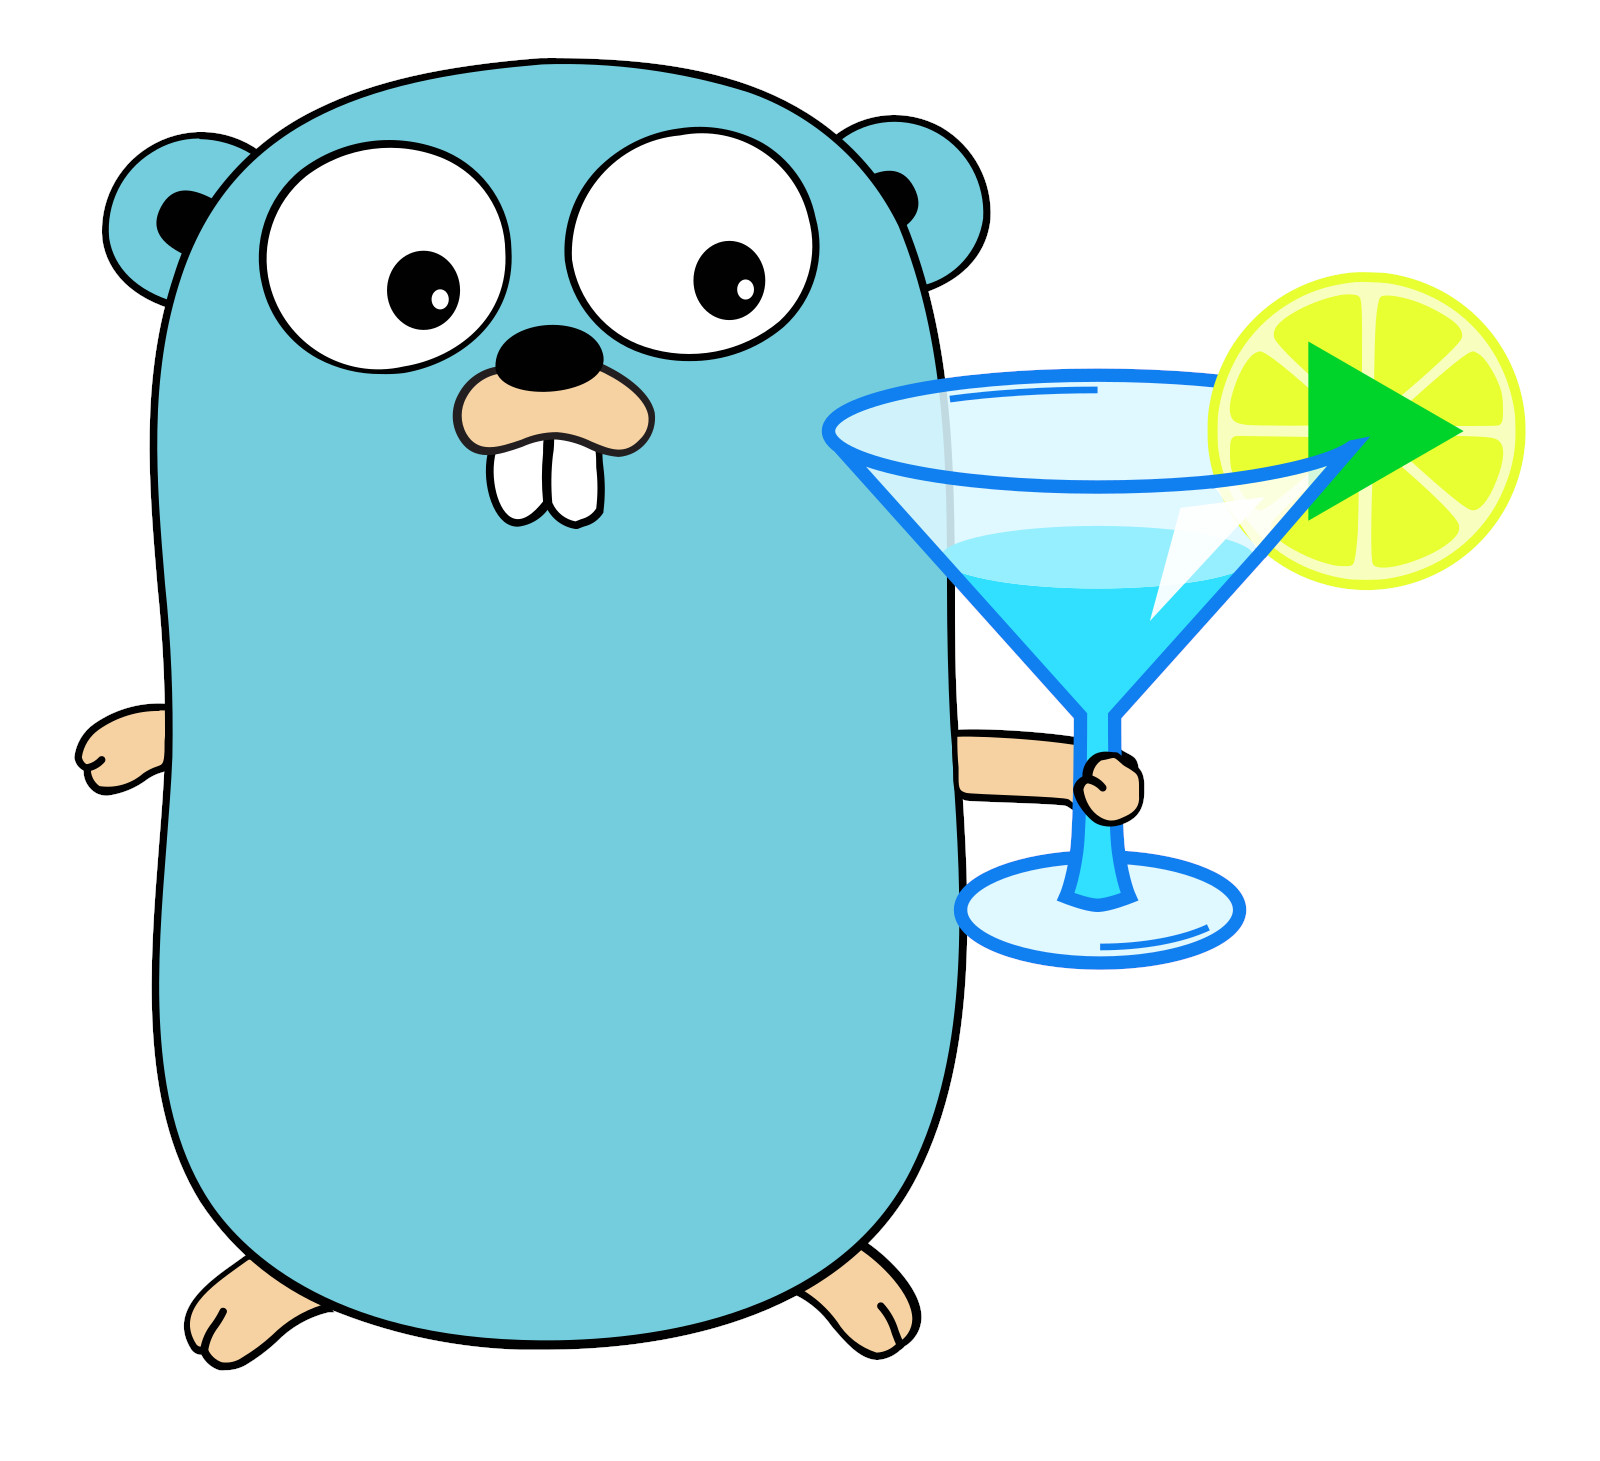 Go Gopher Raises a Glass to Ymuse Health